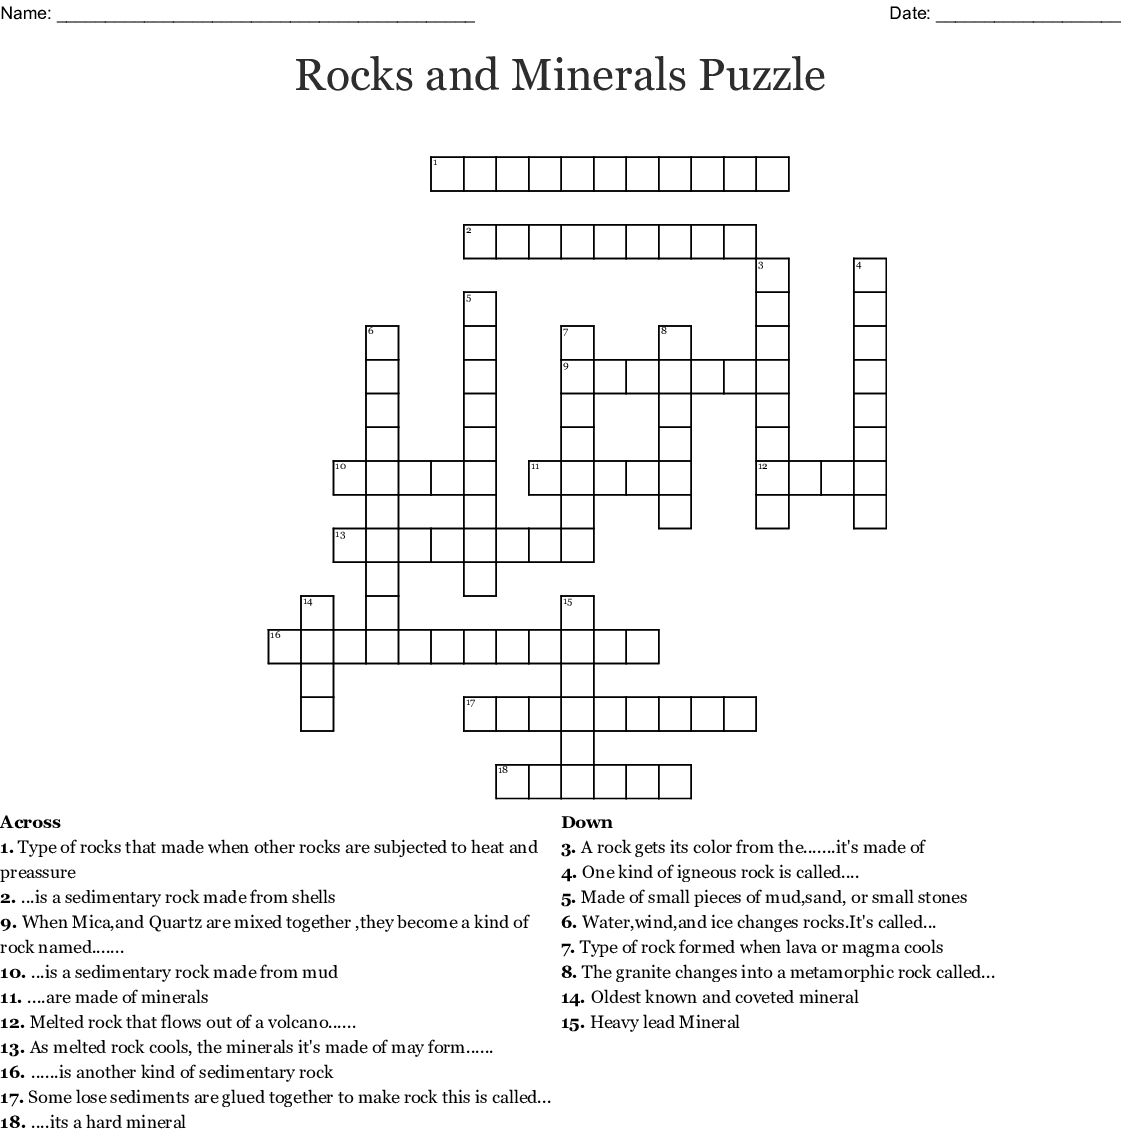 Free Printable Crossword Puzzles For Rocks And Minerals